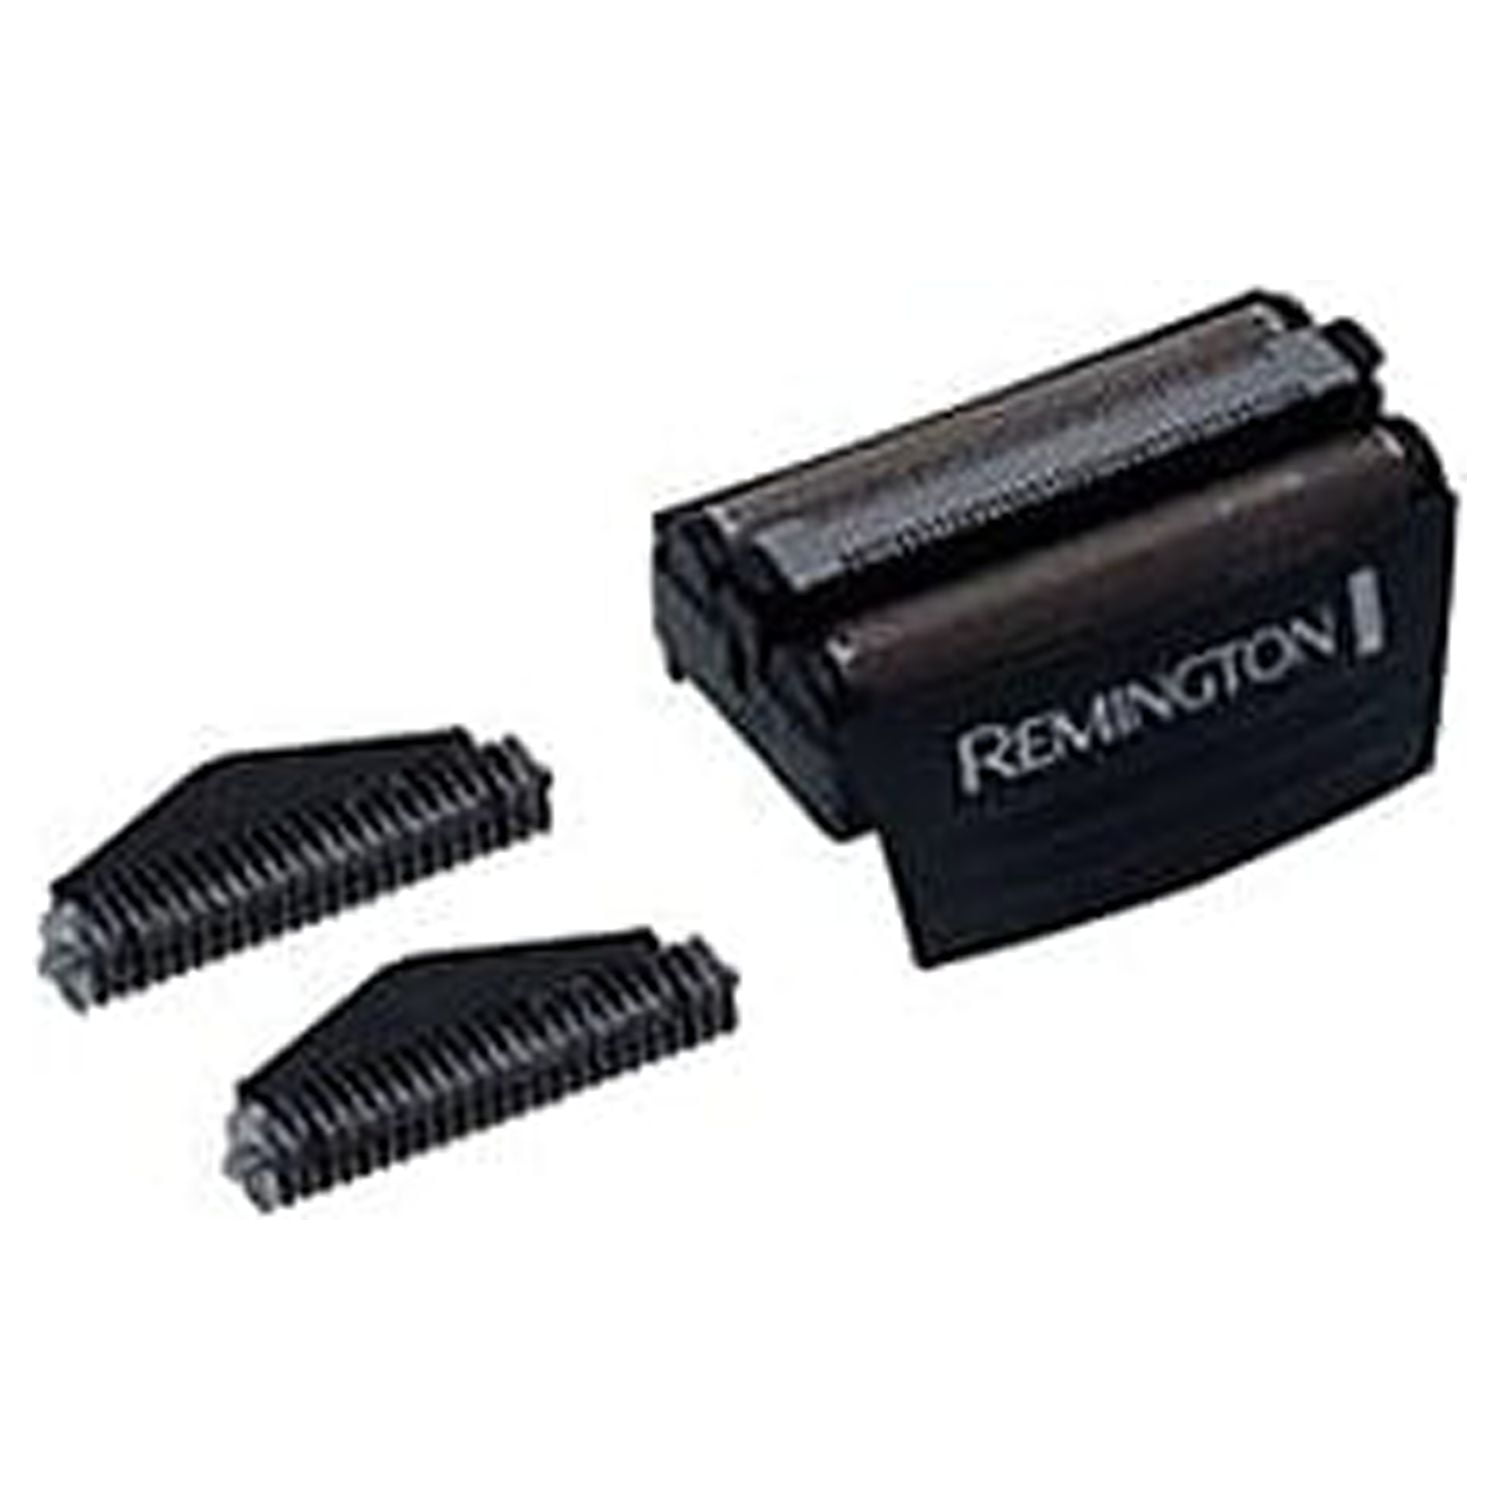 Remington Shavers Replacement Screens and Cutters Black (SPF300) | Scherköpfe